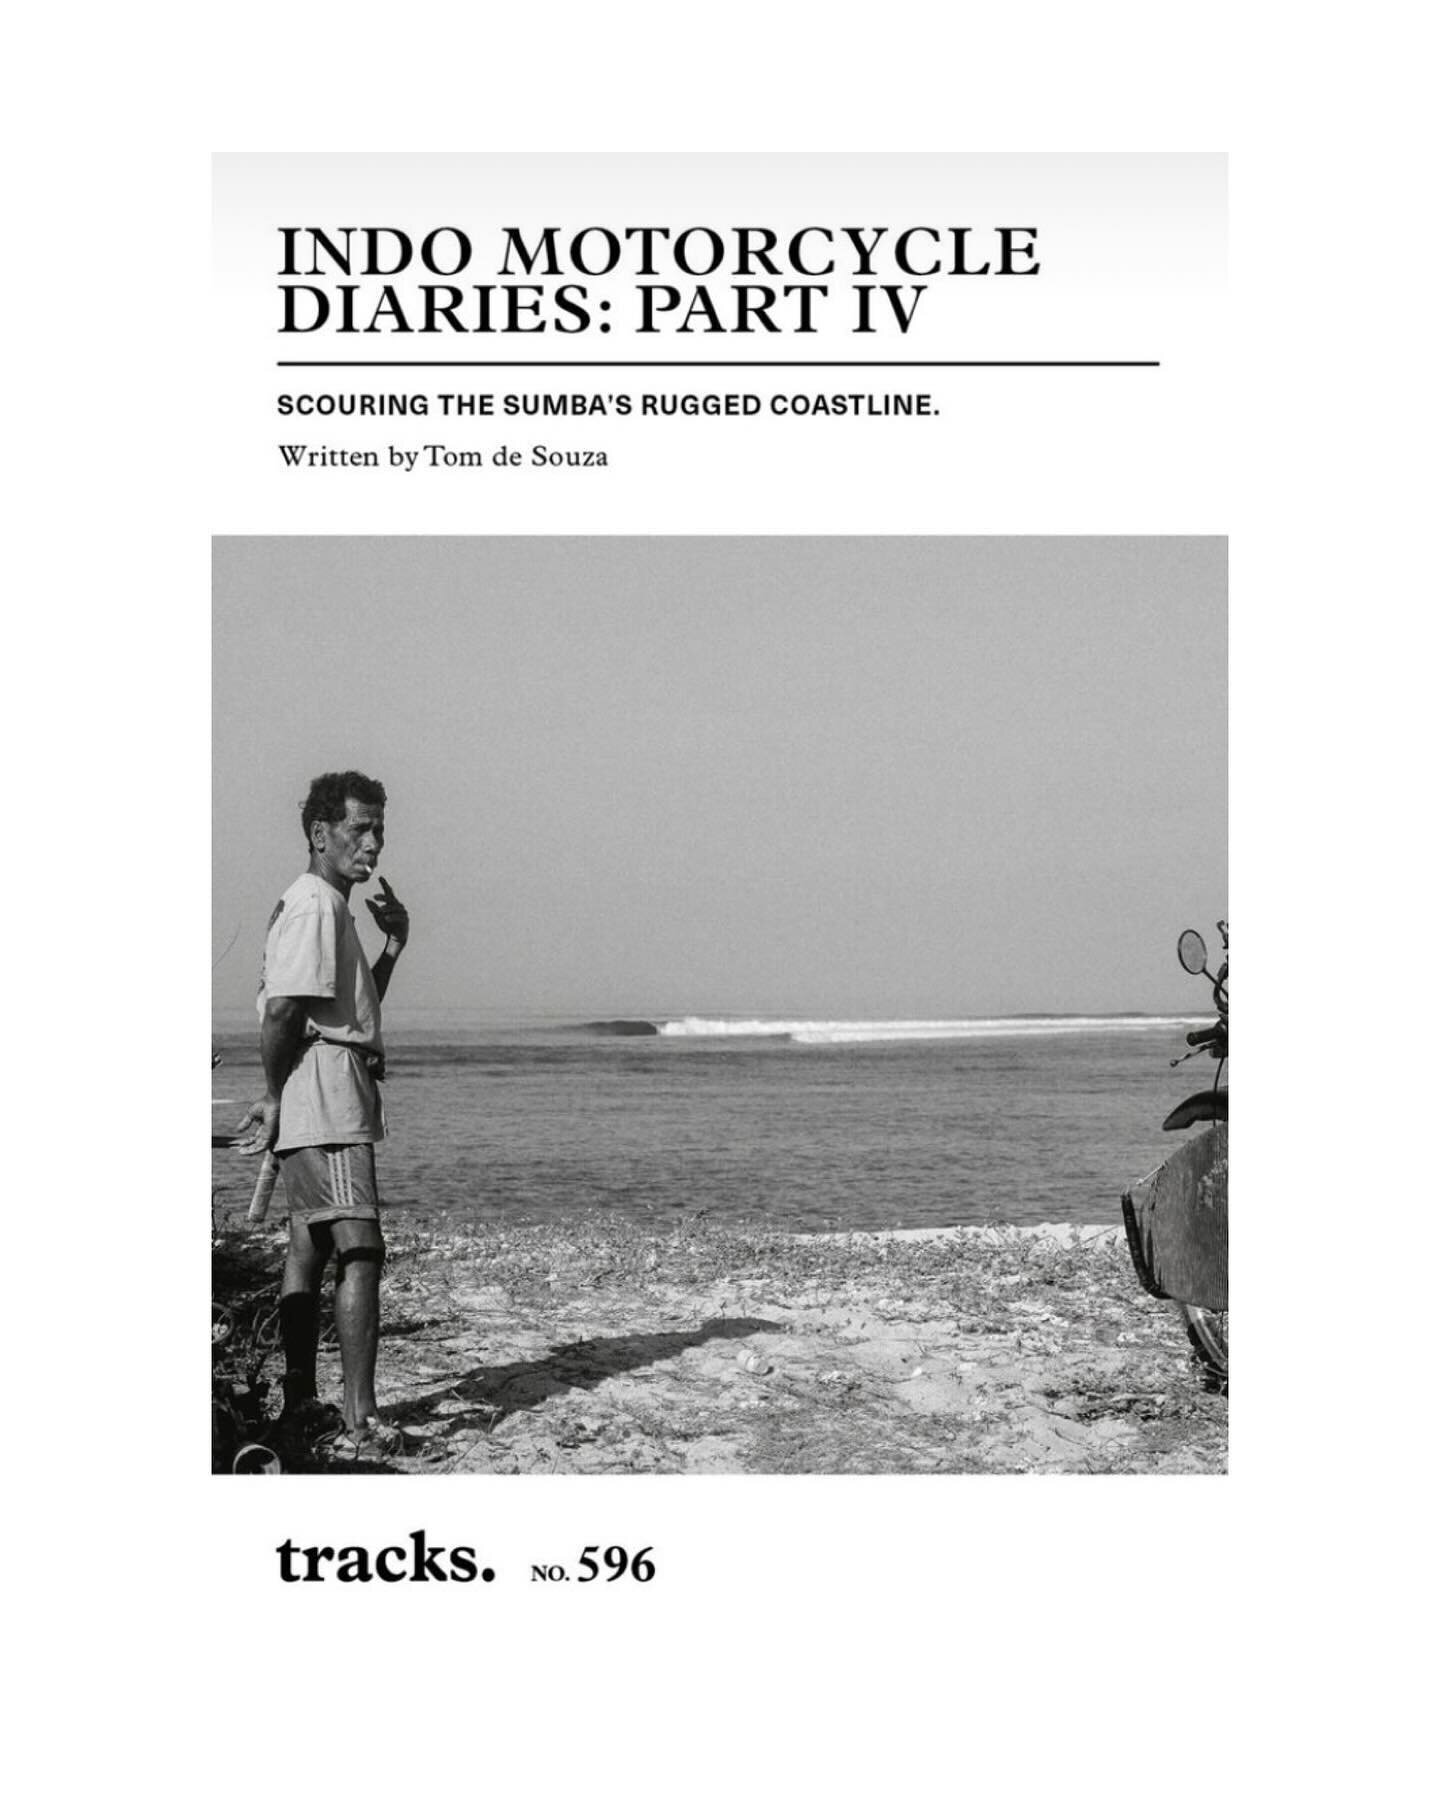 Indo Motorcycle Diaries Part IV.
Scouring a stone-age island for surf. Found a couple waves and some wild animalistic rituals too.
Probably as deep in Indo as you can get. 
Full story on the pages of @tracksmag, now on newsagent shelves.